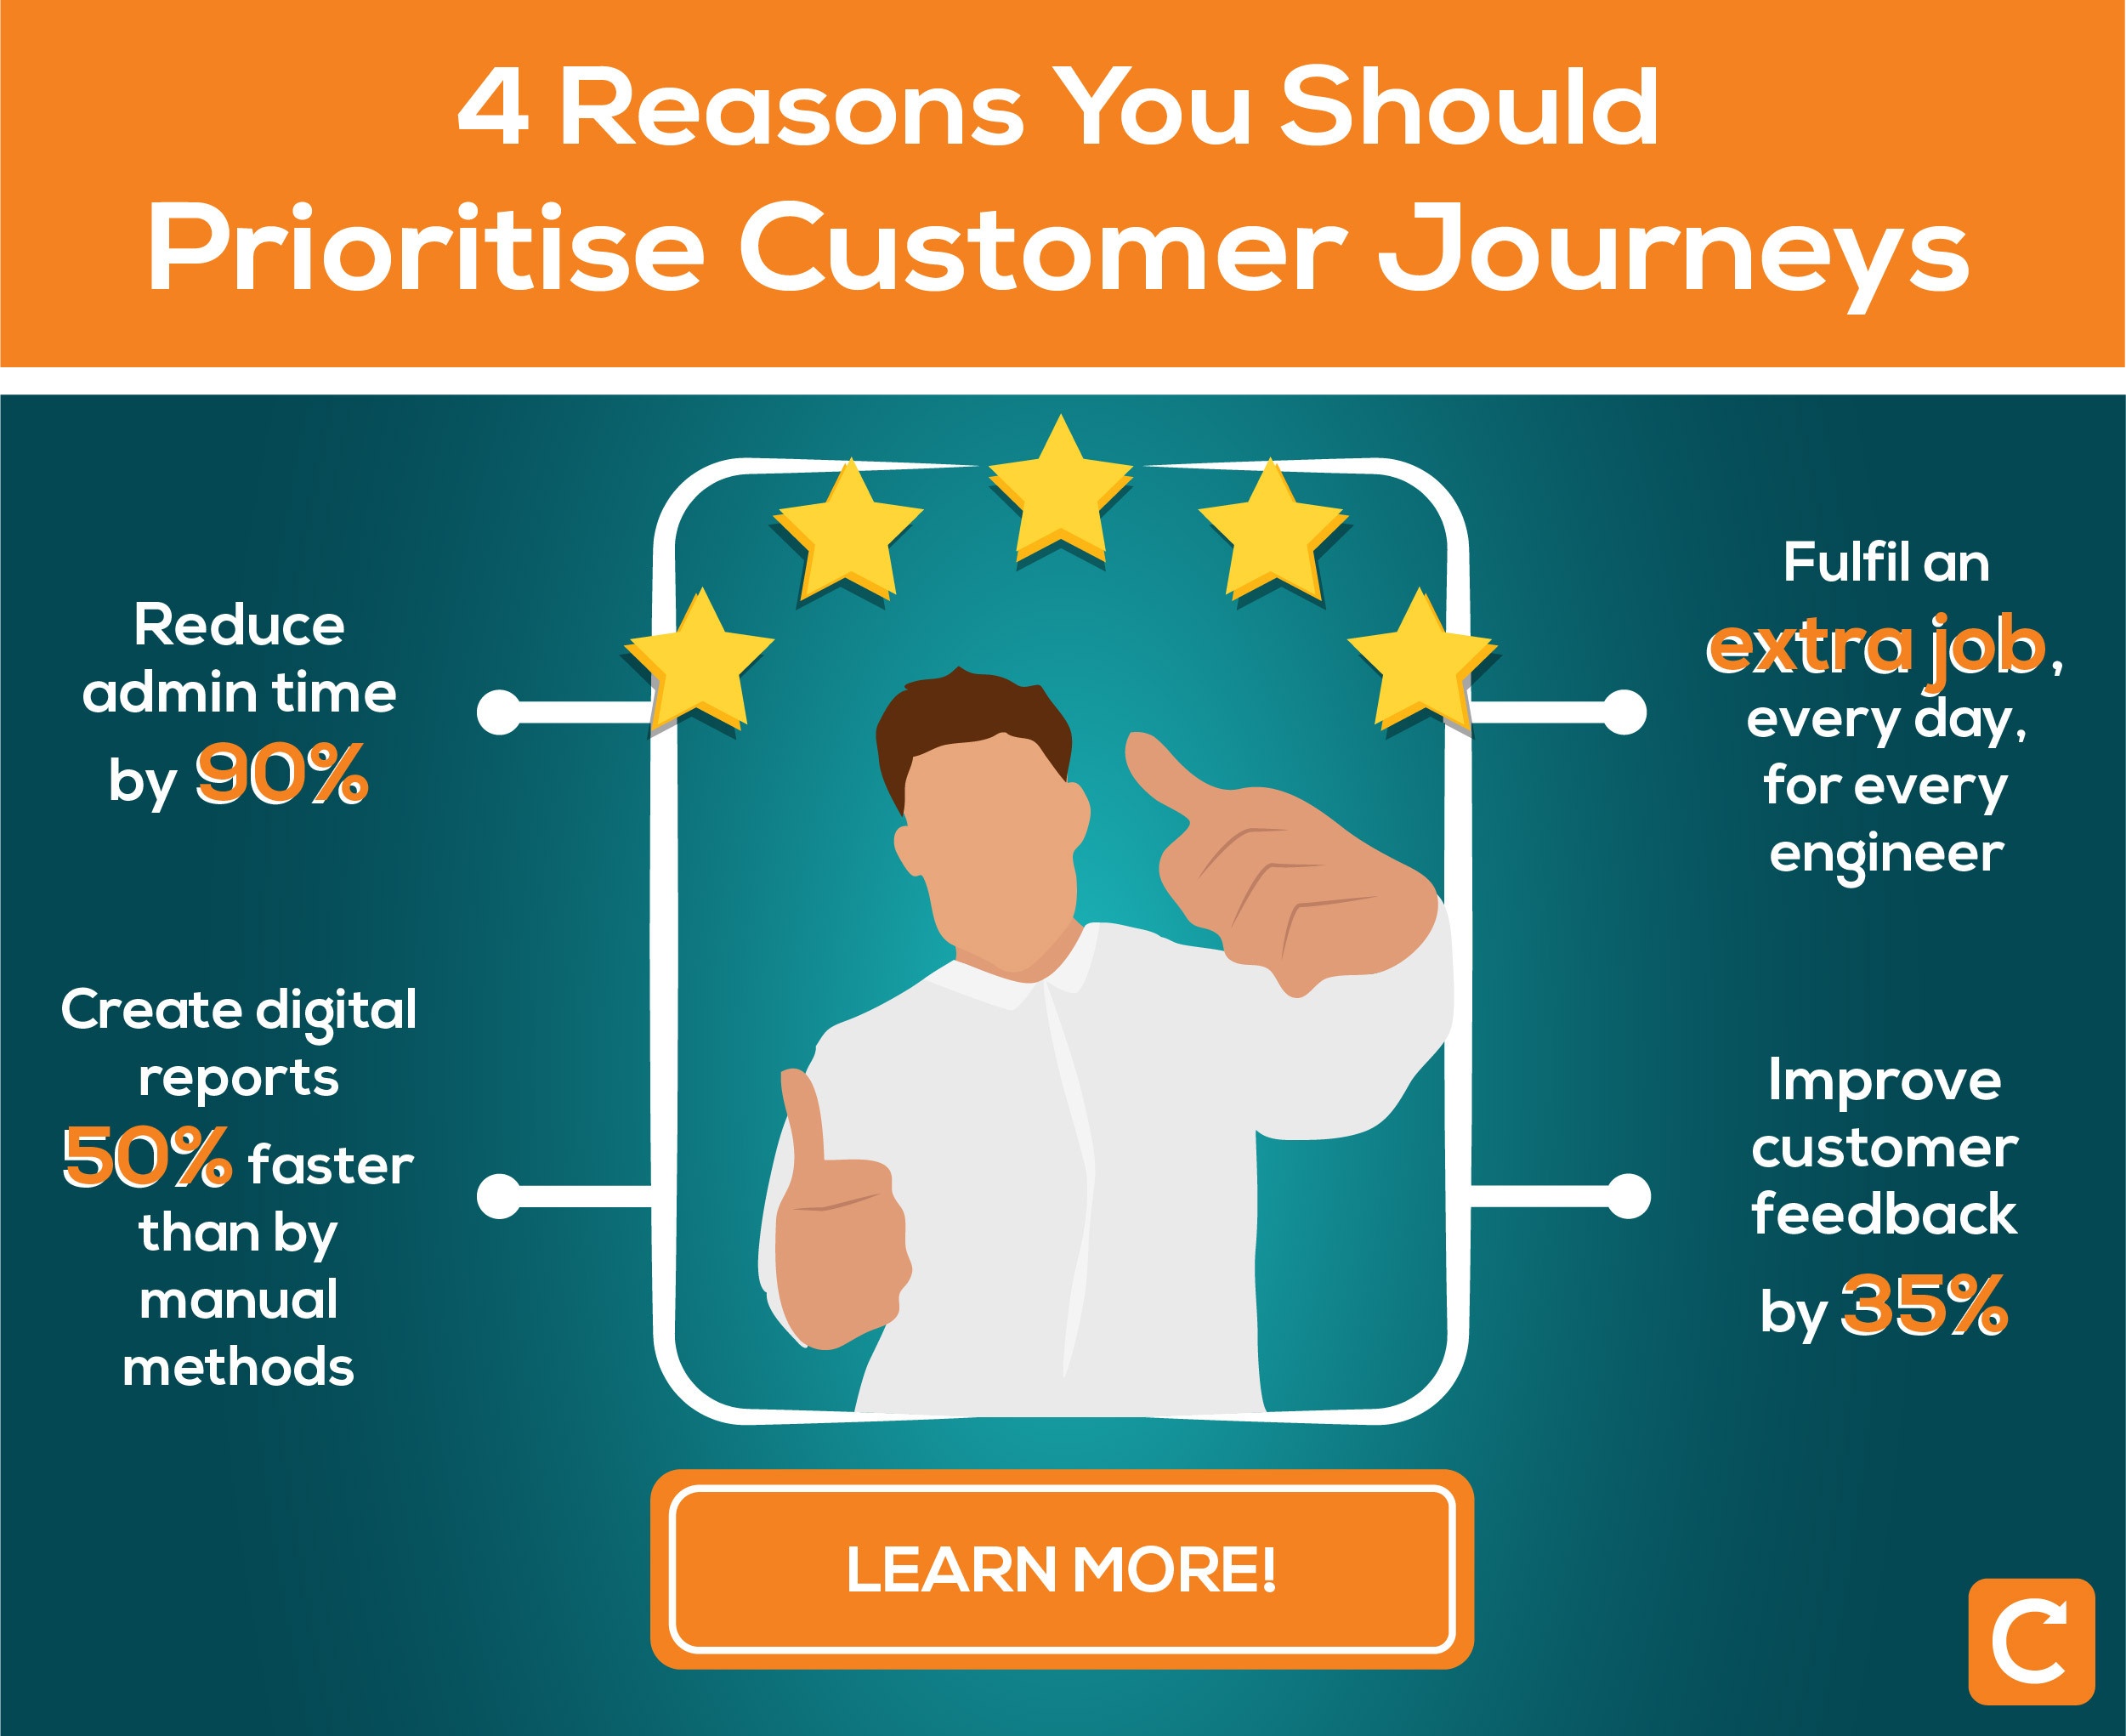 4 reasons you should prioritise customer journeys, learn more about reducing admin time, creating detail reports quickly, booking more jobs everyday, and more. click to check out customer journeys with commusoft